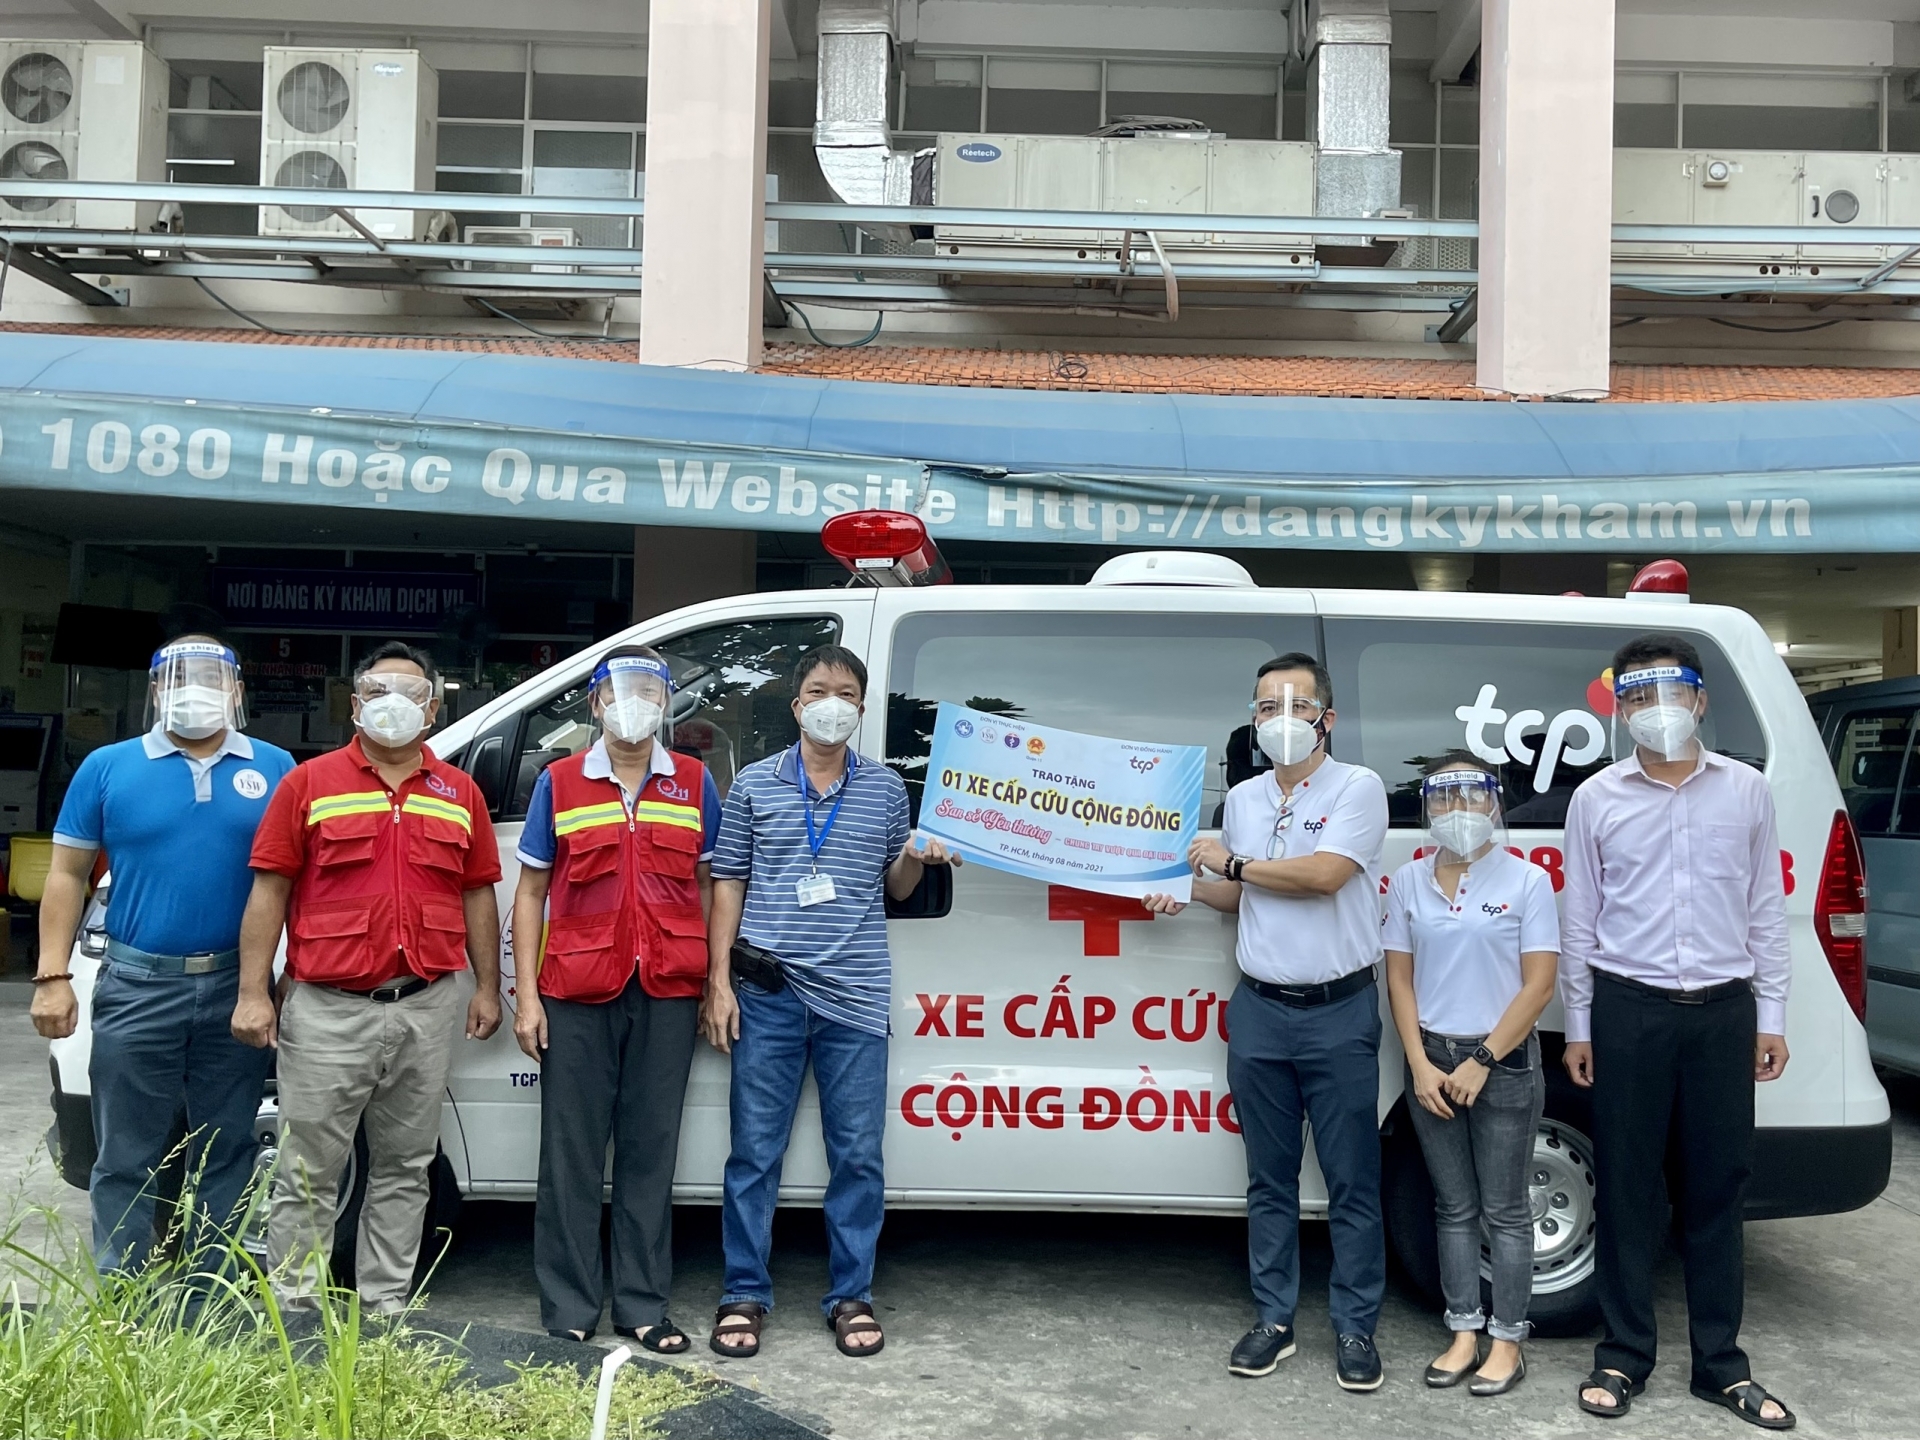 TCPVN supports Vietnam’s fight against COVID-19